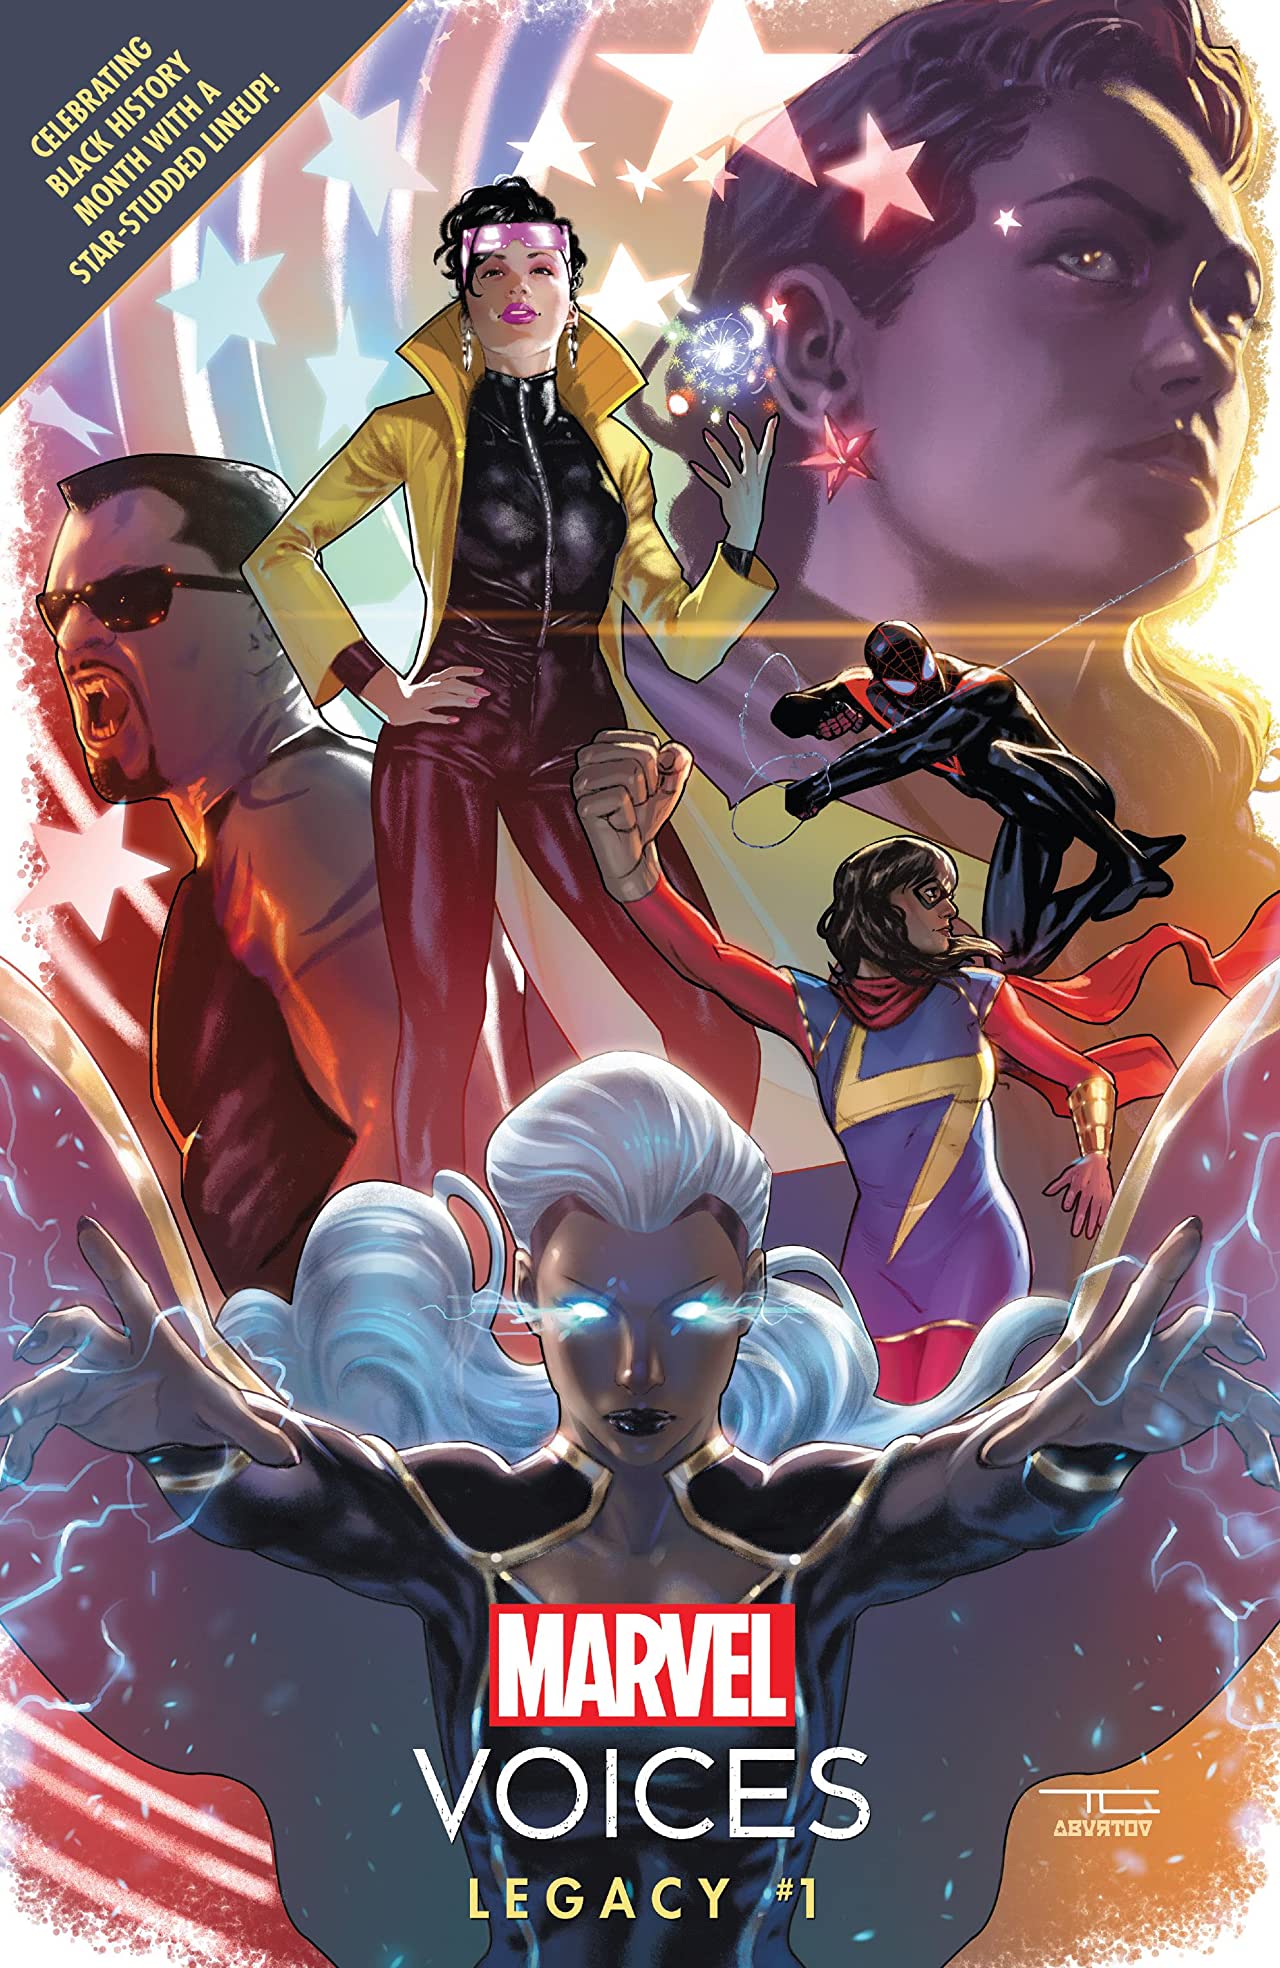 Marvel's Voices (2021) Legacy #1